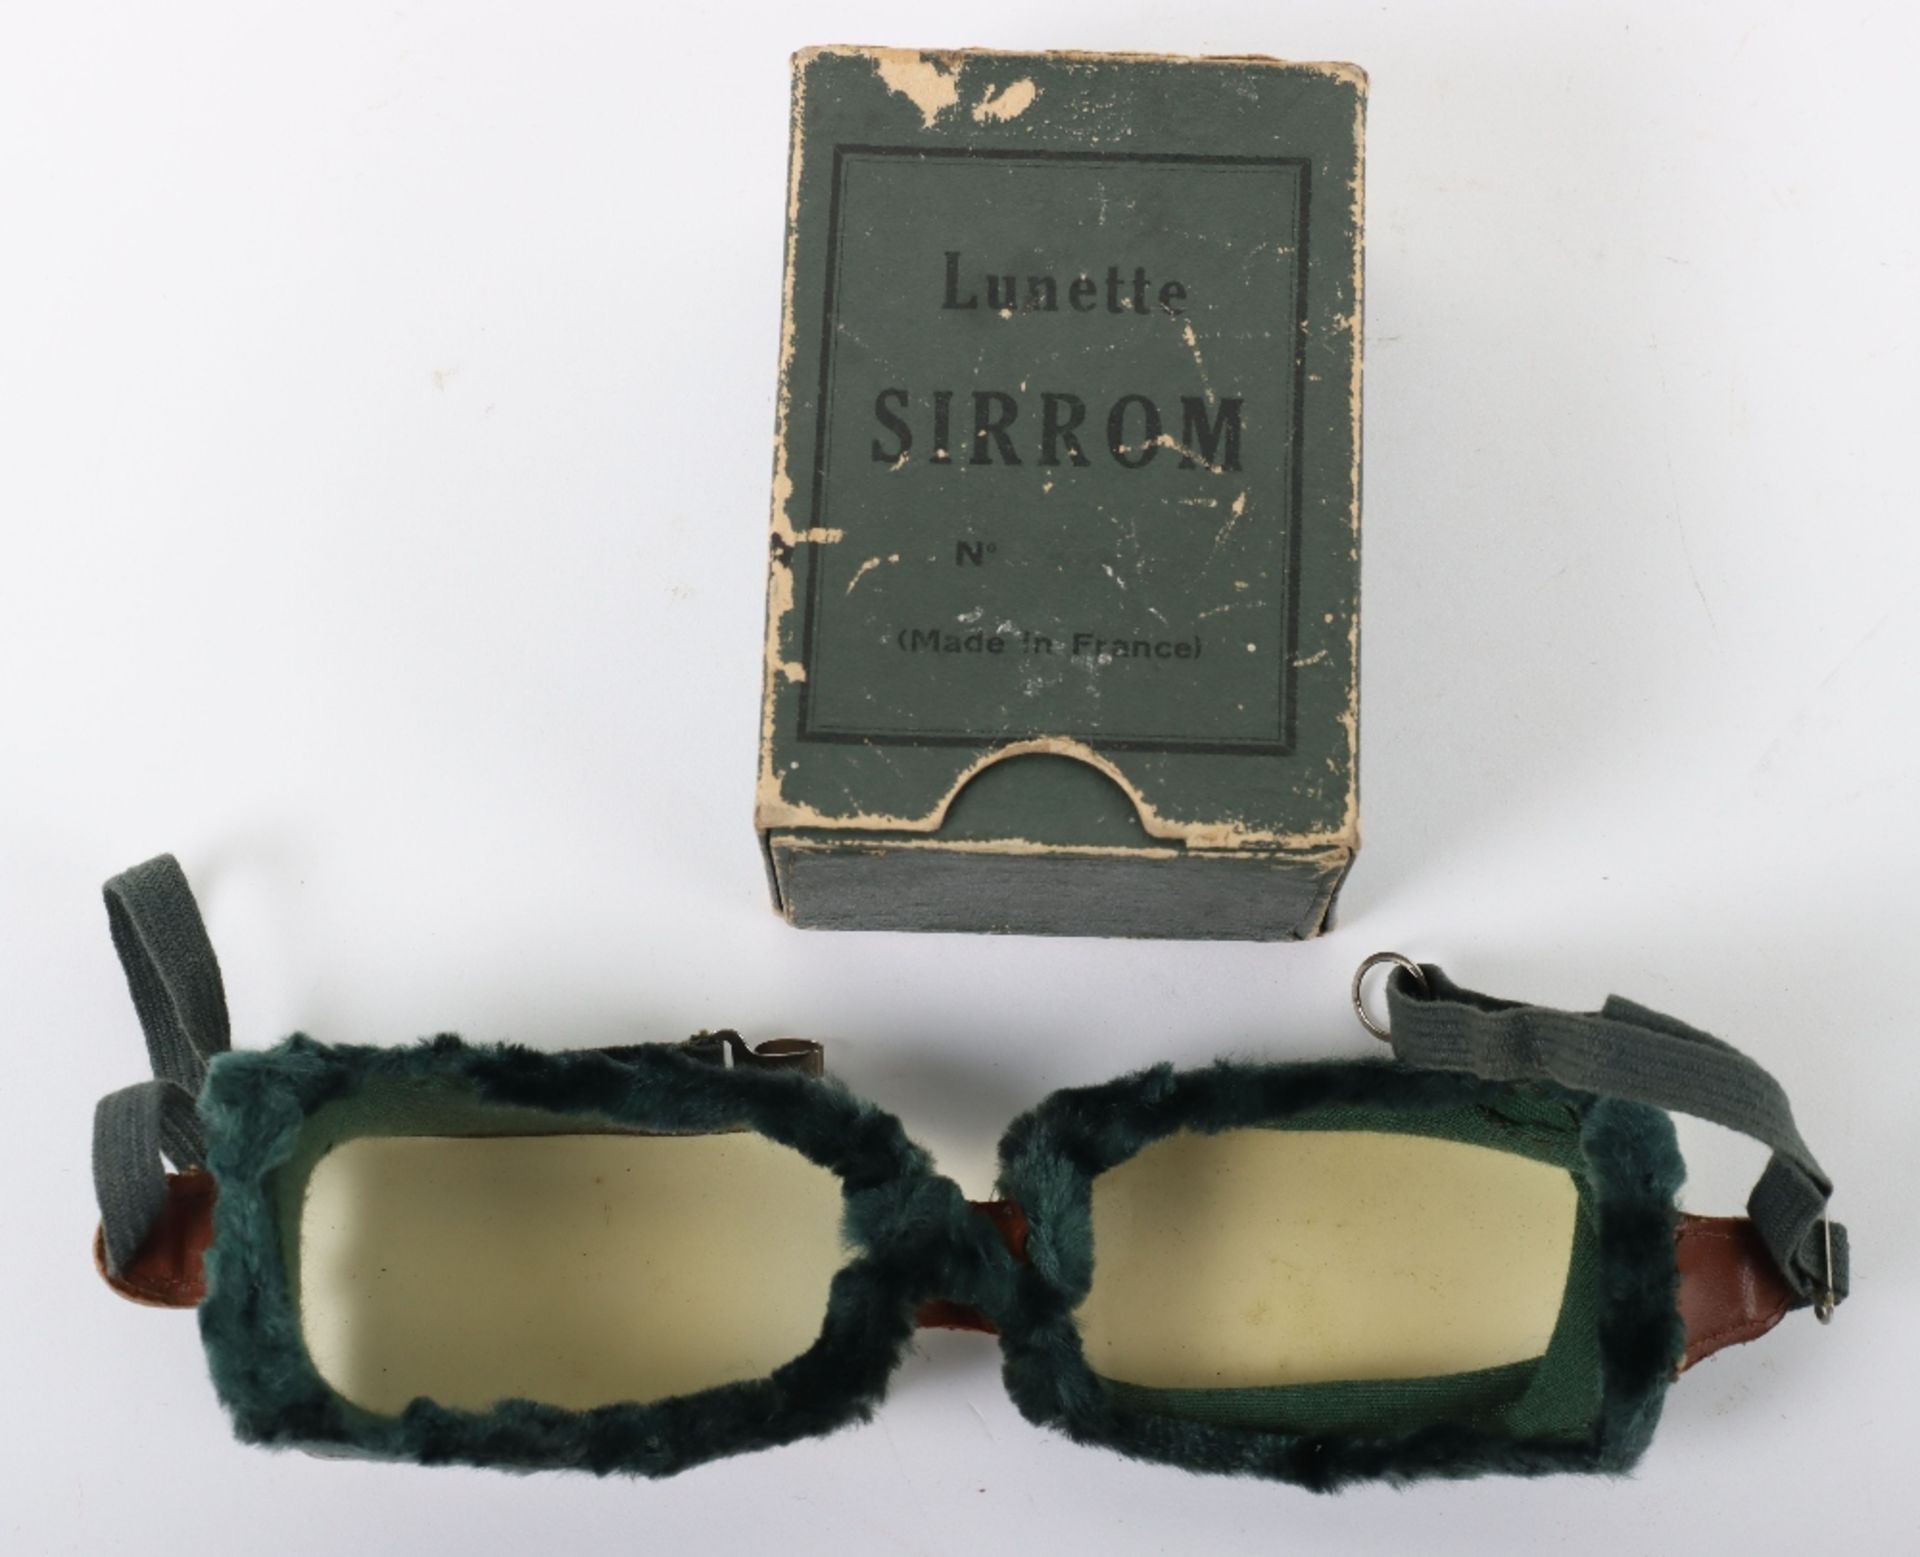 Pair of Vintage Lunette Sirrom Aviators Goggles - Image 2 of 5